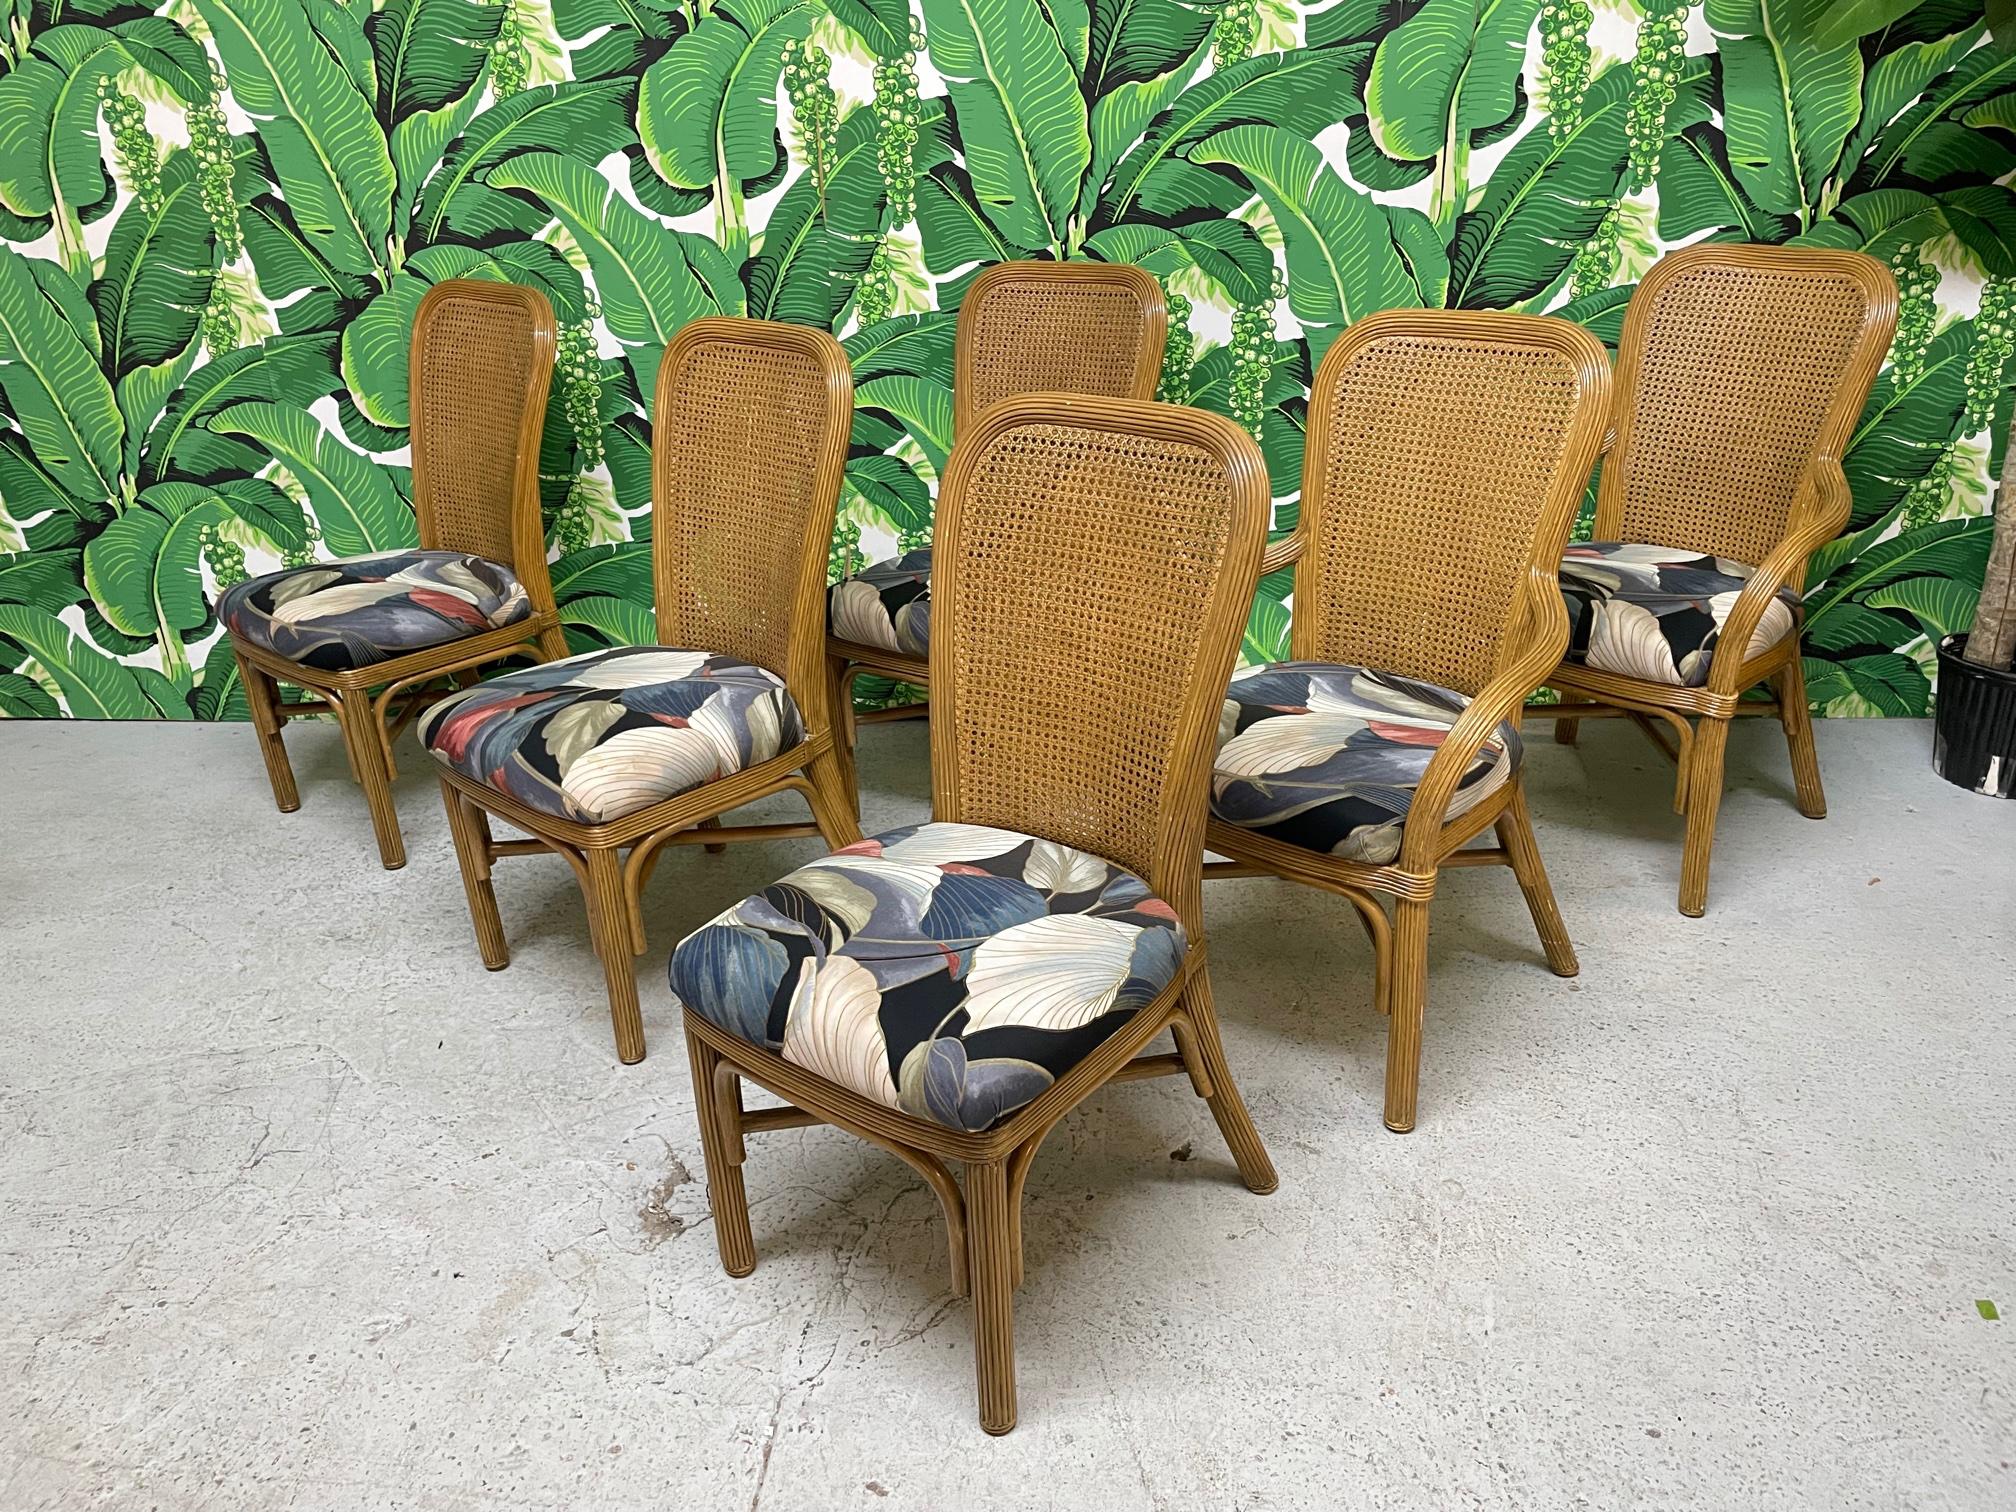 Set of six vintage rattan dining chairs feature veneer of pencil reed rattan and double cane backs. Set consists of 2 arm chairs and 4 side chairs. Very comfortable cushions and structurally sound frames. Good condition with imperfections consistent